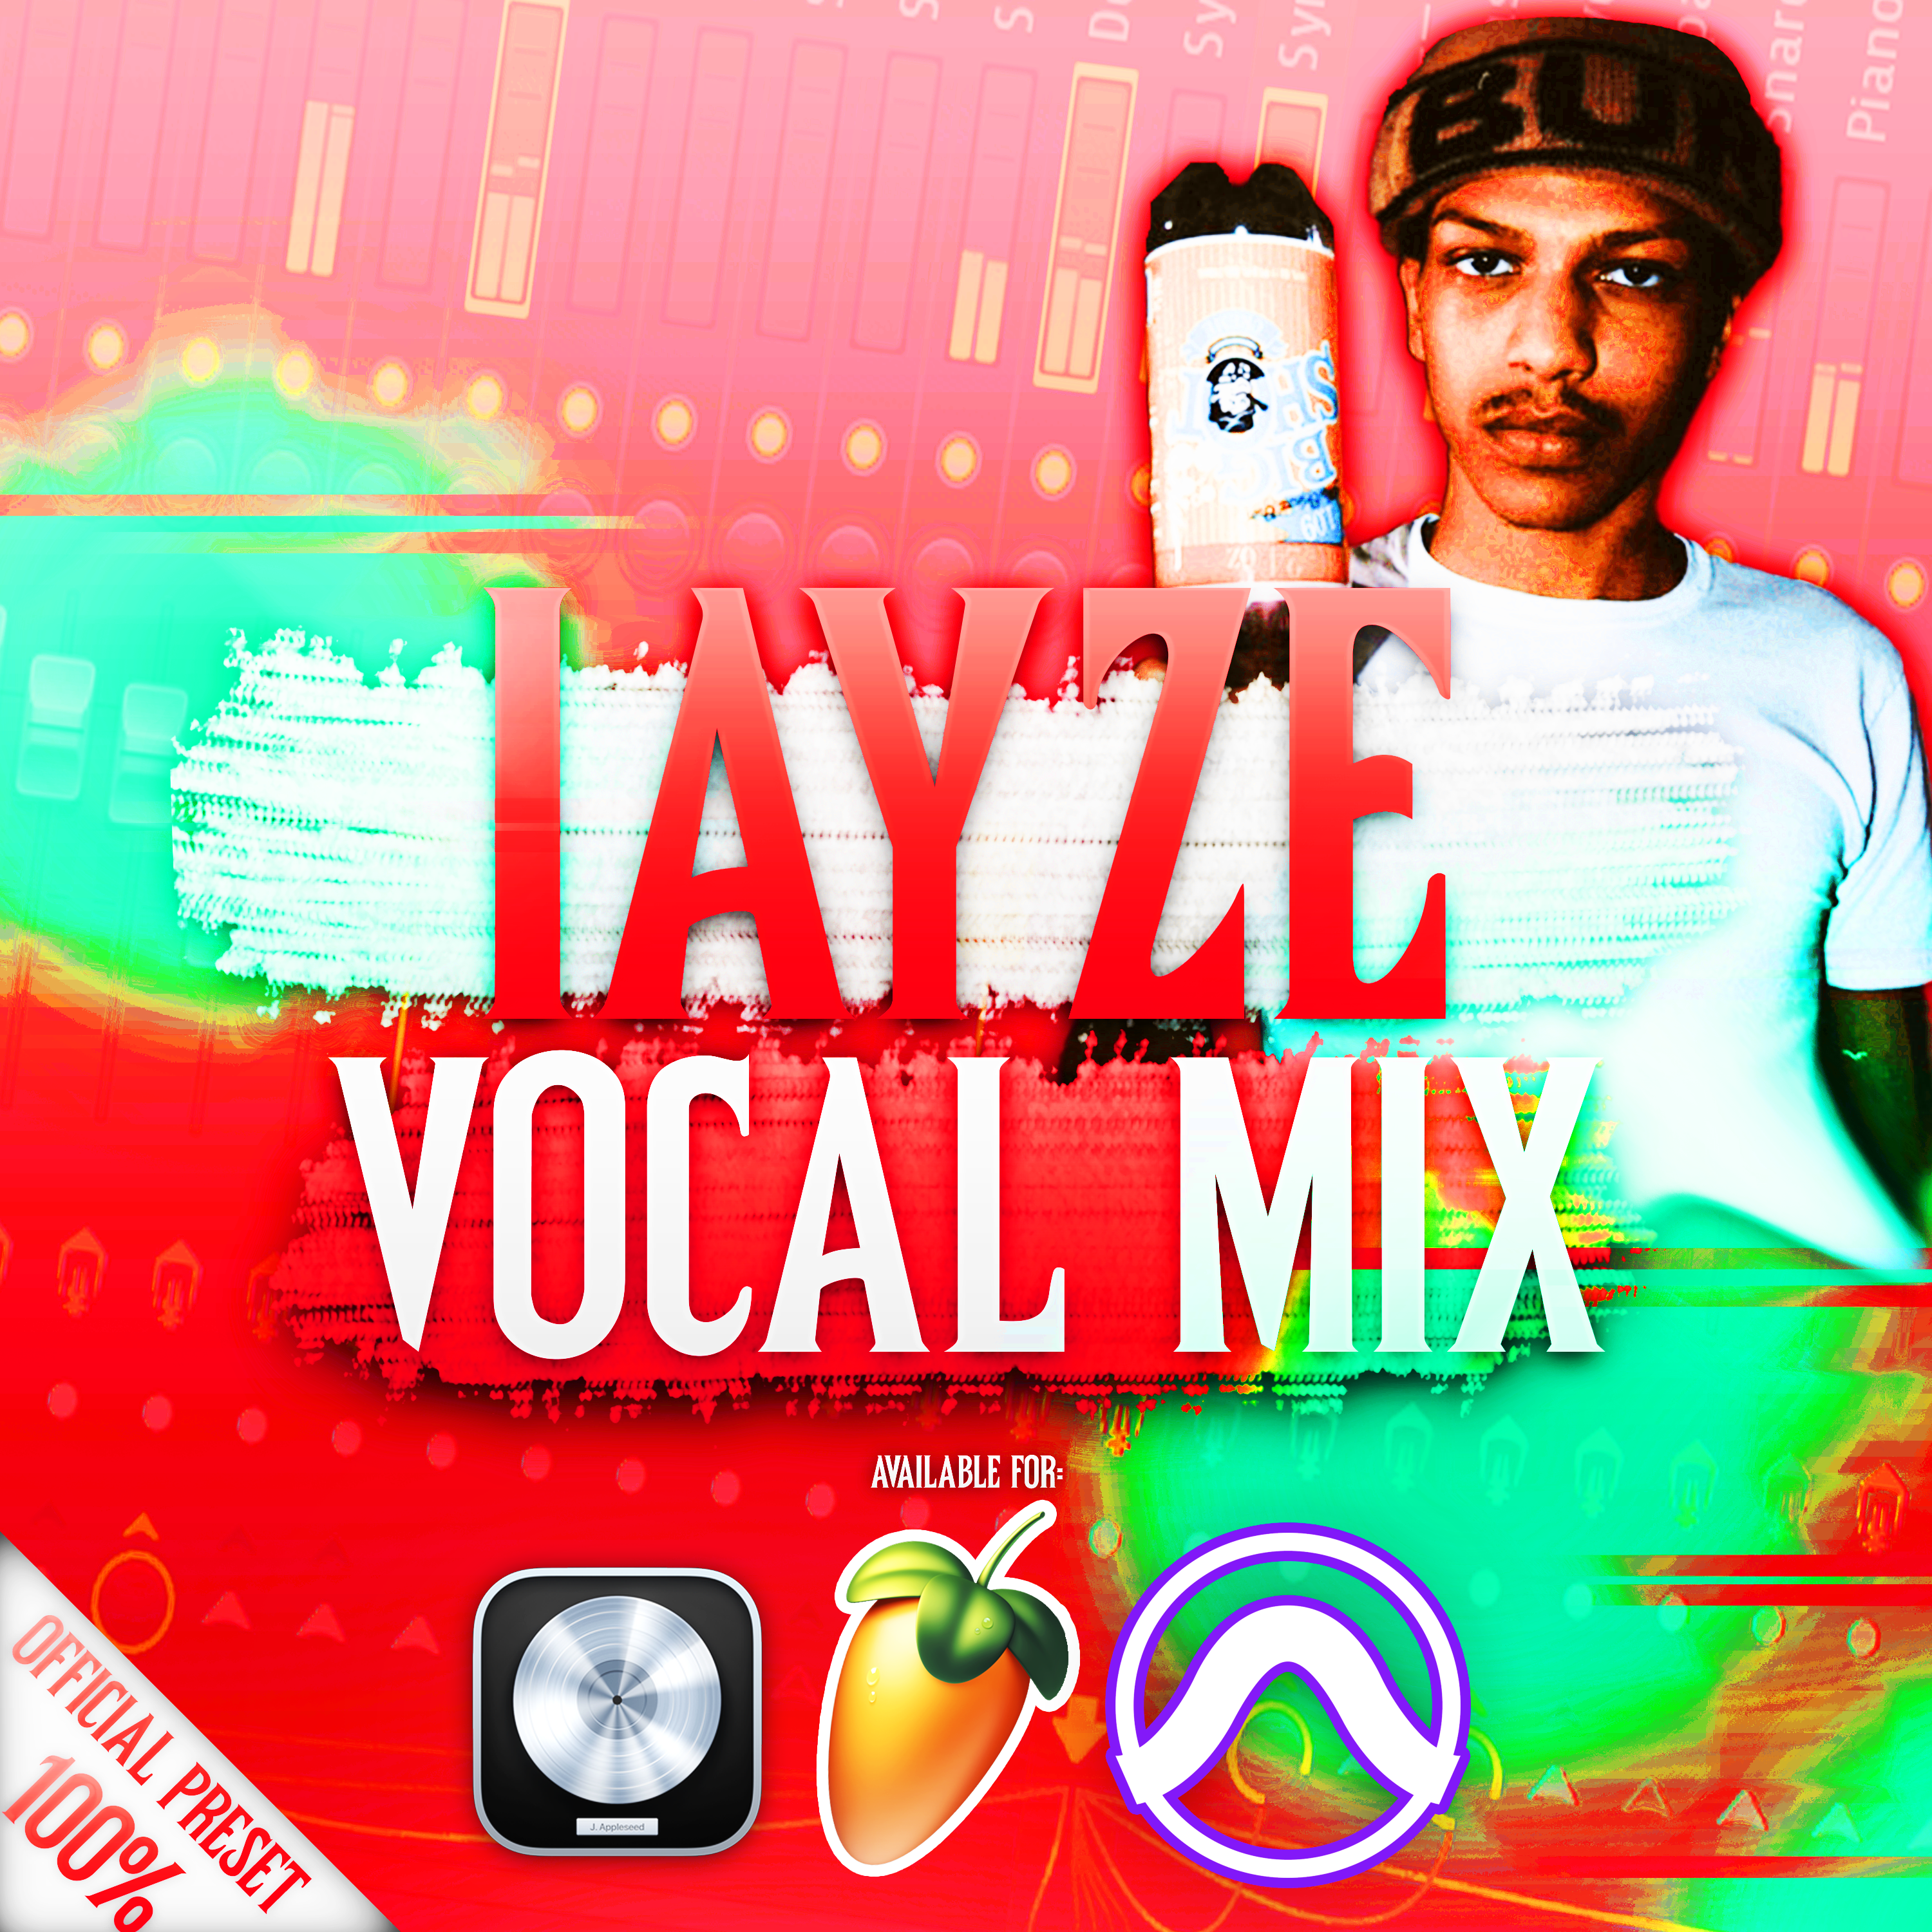 The Iayze OFFICIAL Vocal Preset + Project File